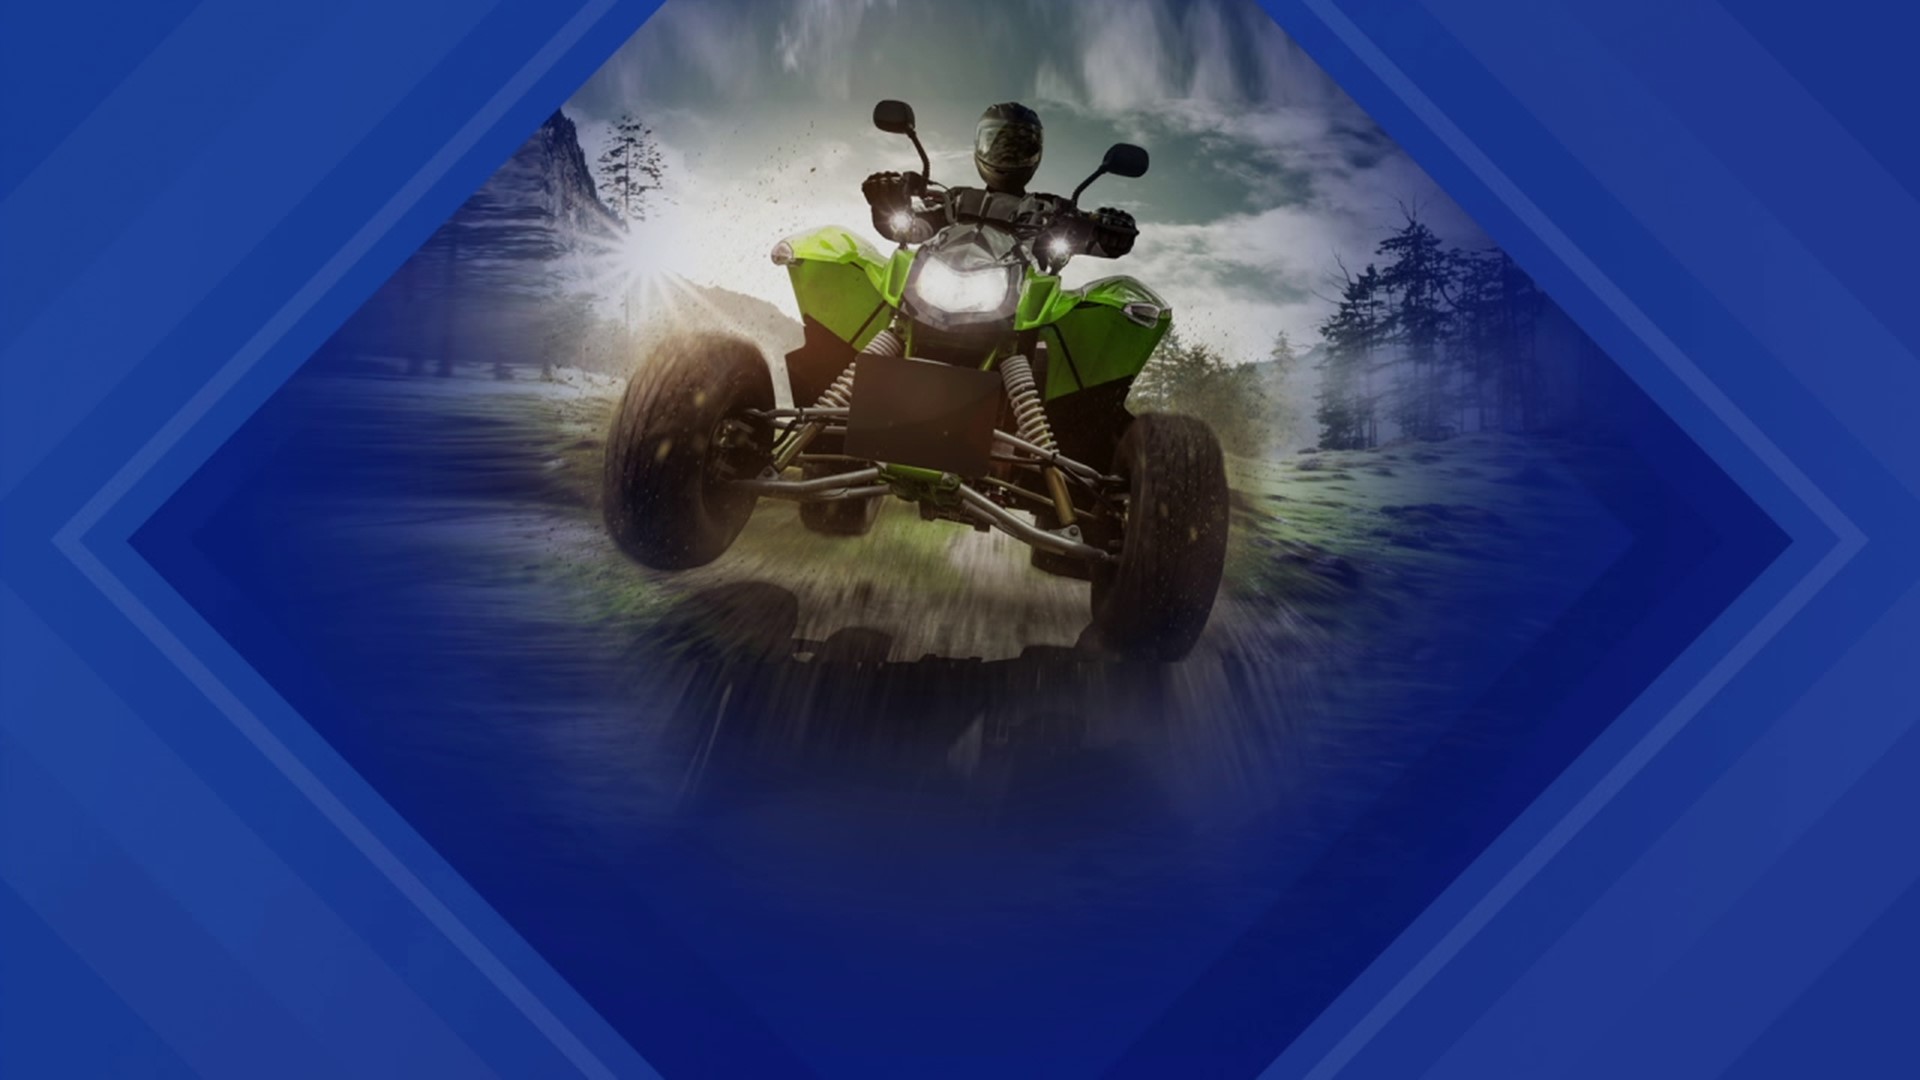 A borough in Schuylkill County wants to pass an ordinance to bring more ATV riders into town.